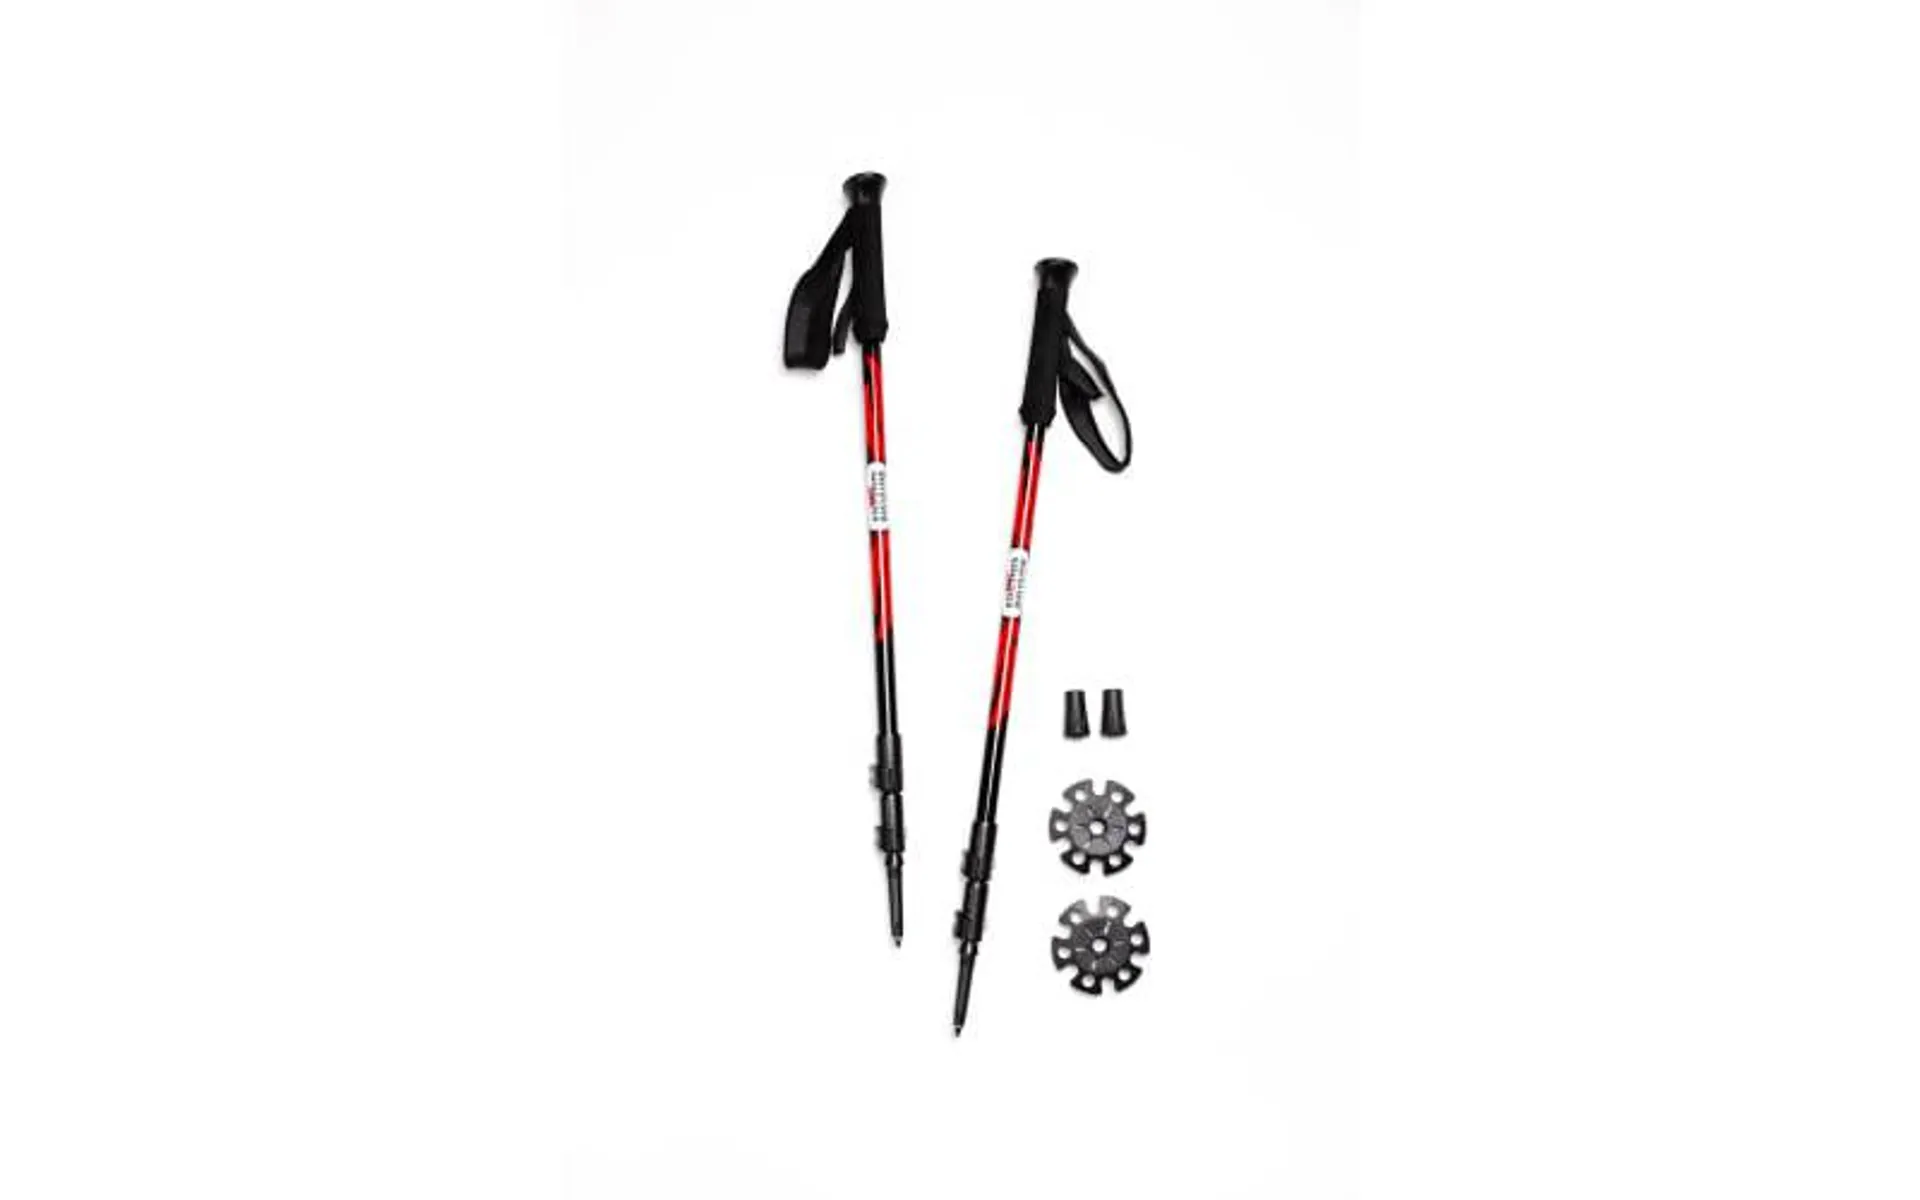 Redfeather Outdoors 3-Section Fast Lock Trekking Poles